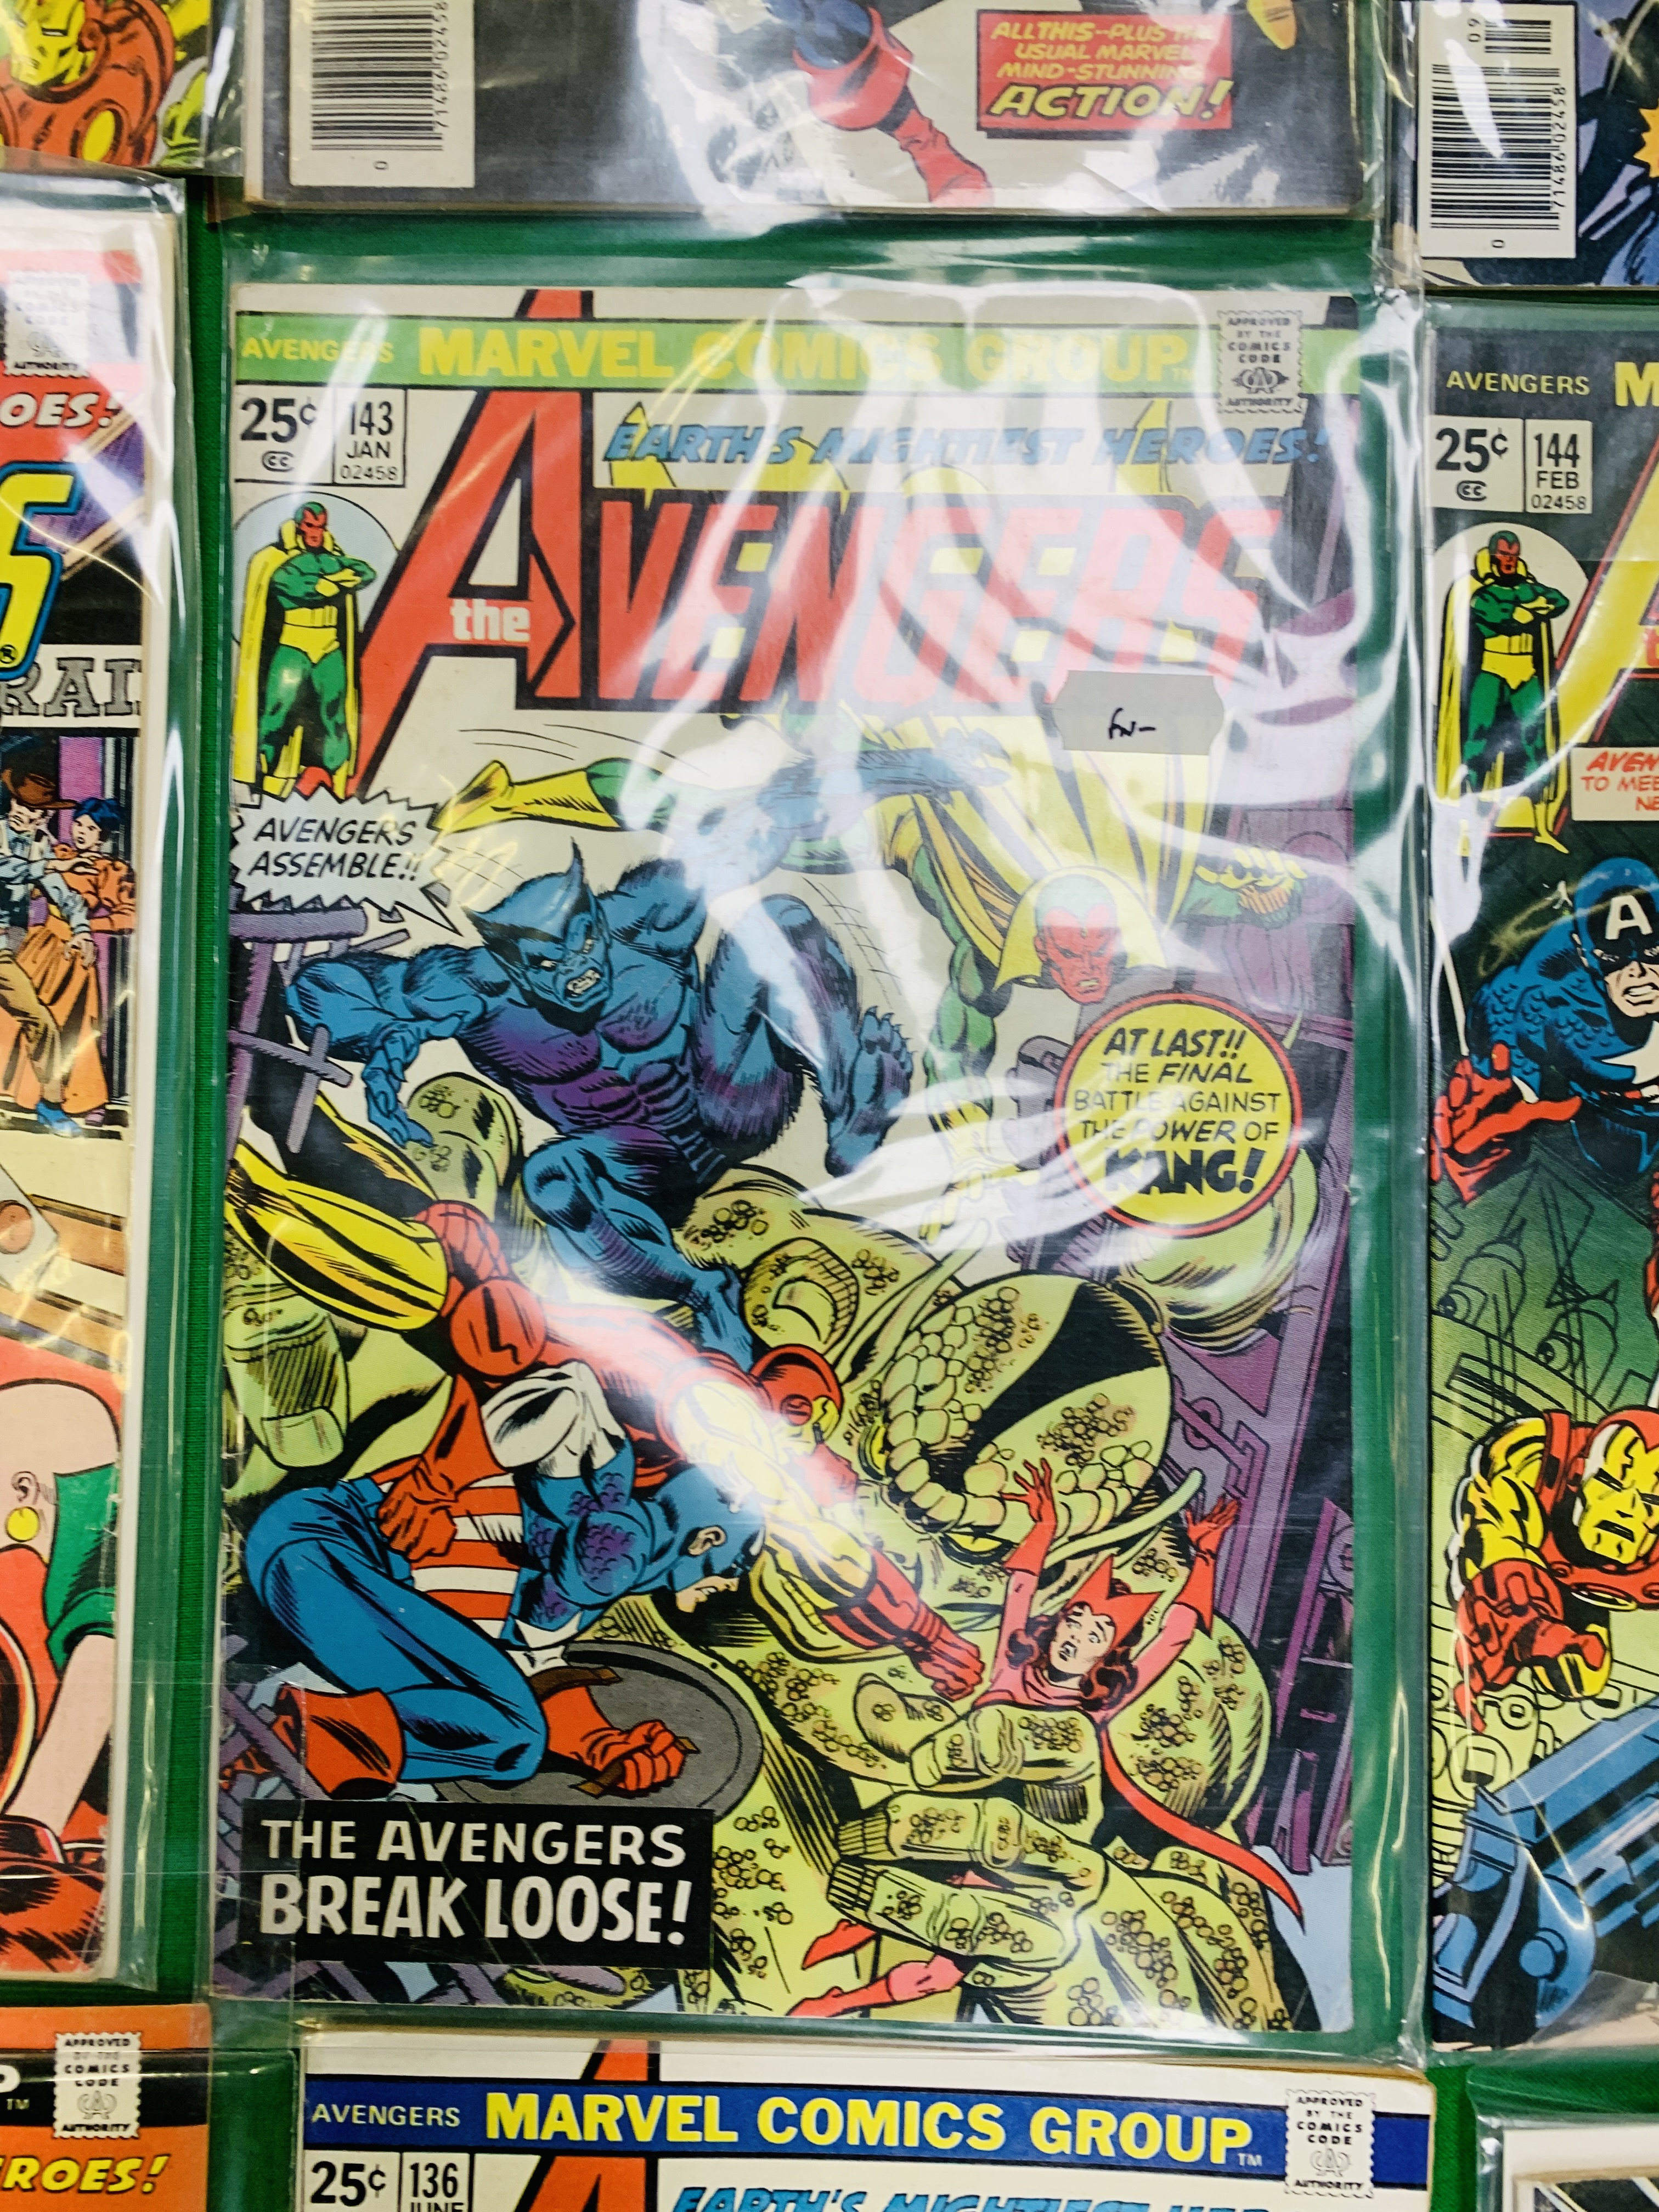 MARVEL COMICS THE AVENGERS NO. 101 - 299, MISSING ISSUES 103 AND 110. - Image 29 of 130